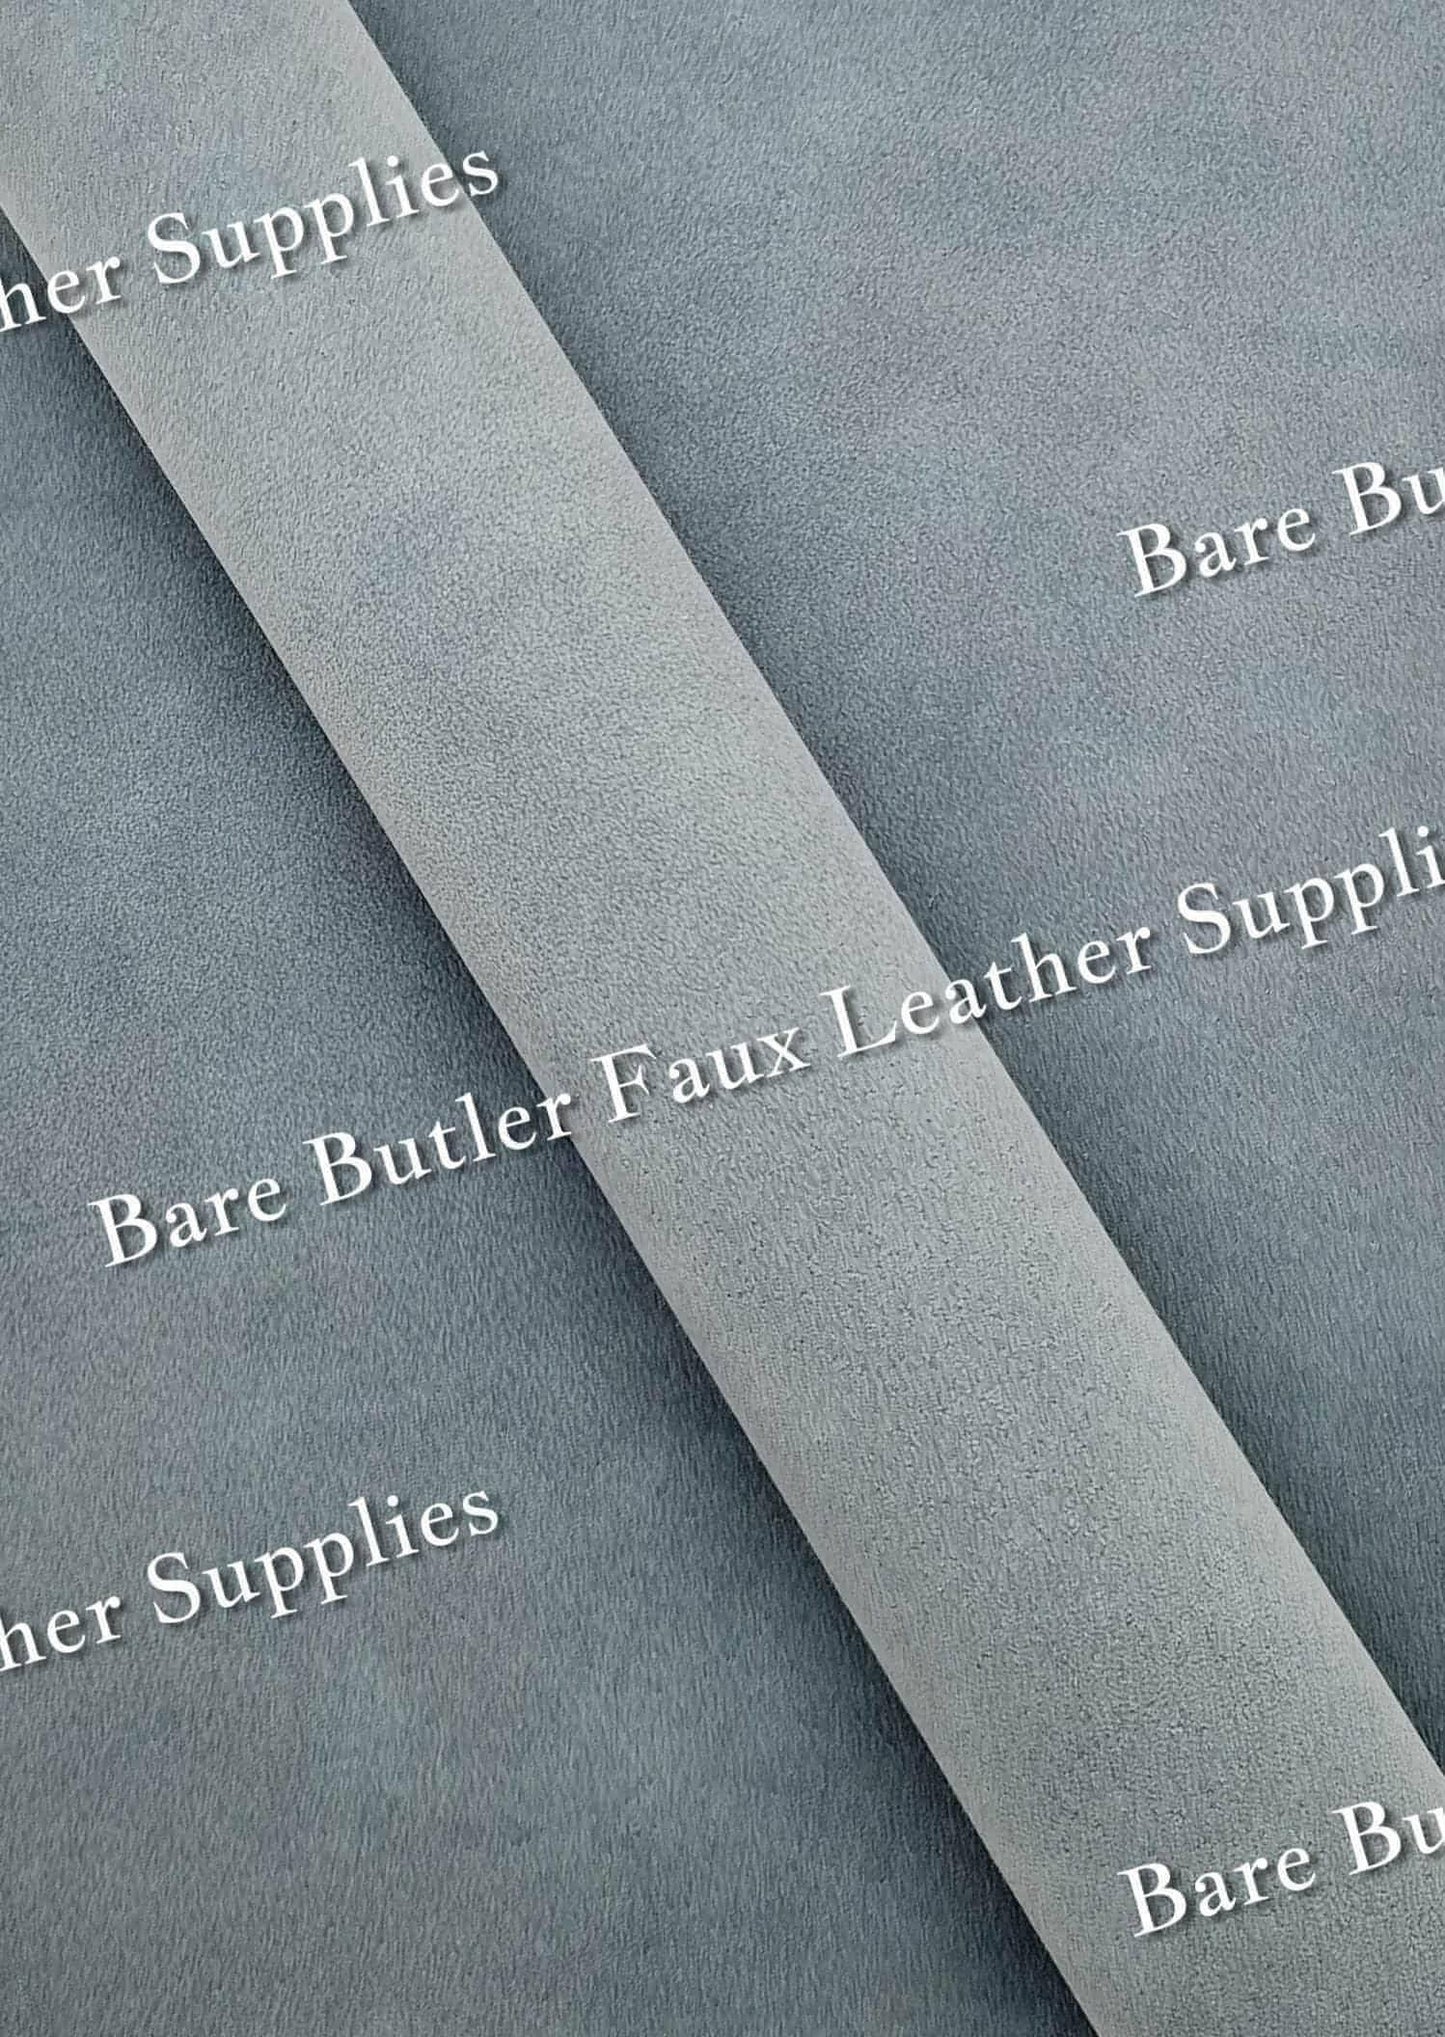 Suede -  Grey - Faux, Faux Leather, Suede - Bare Butler Faux Leather Supplies 